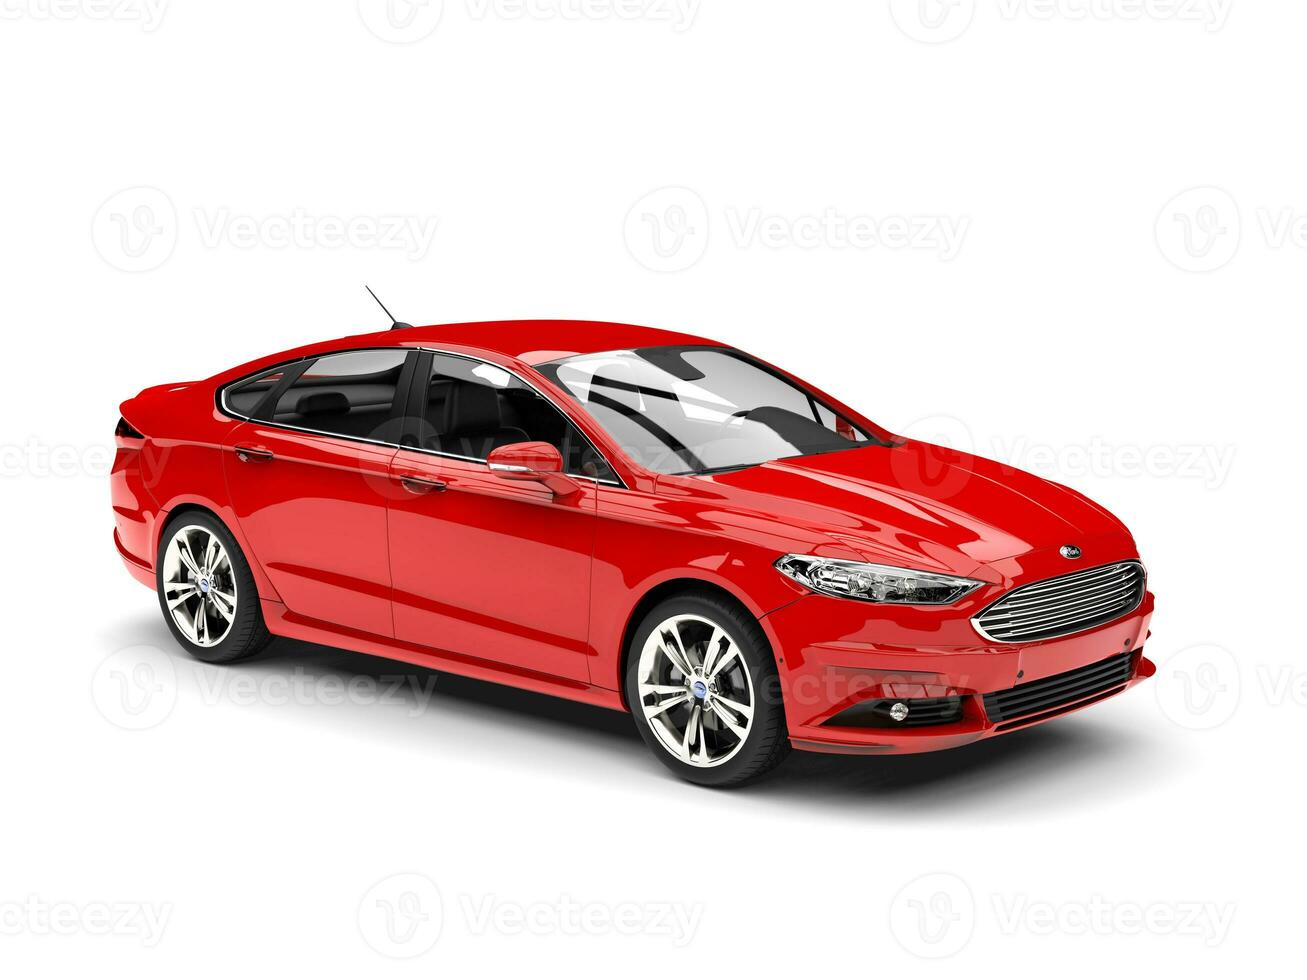 Fire red Ford Mondeo 2015 - 2018 model - beauty shot - 3D Illustration - on white background photo